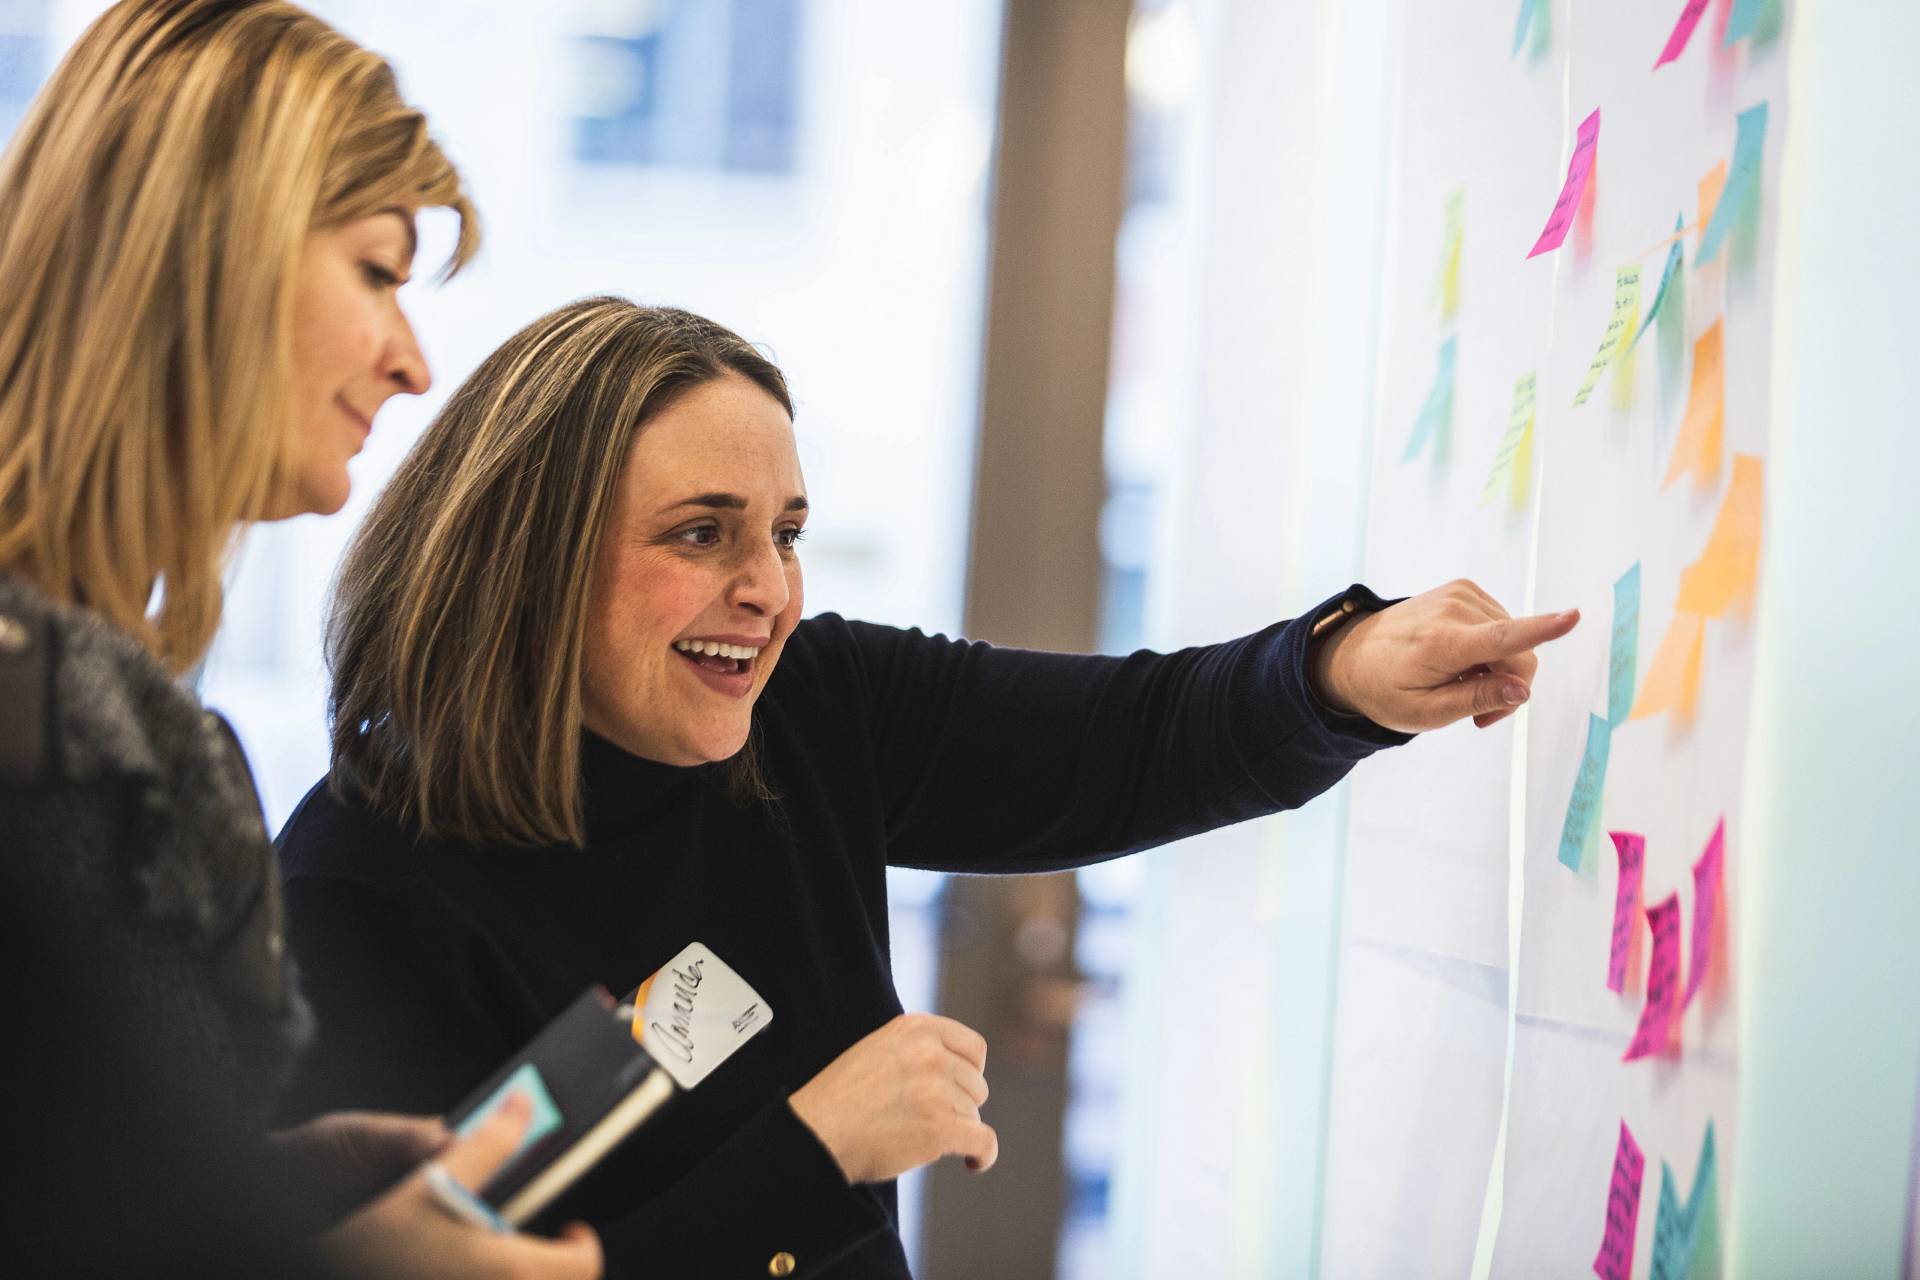 Two women add sticky notes to a whiteboard